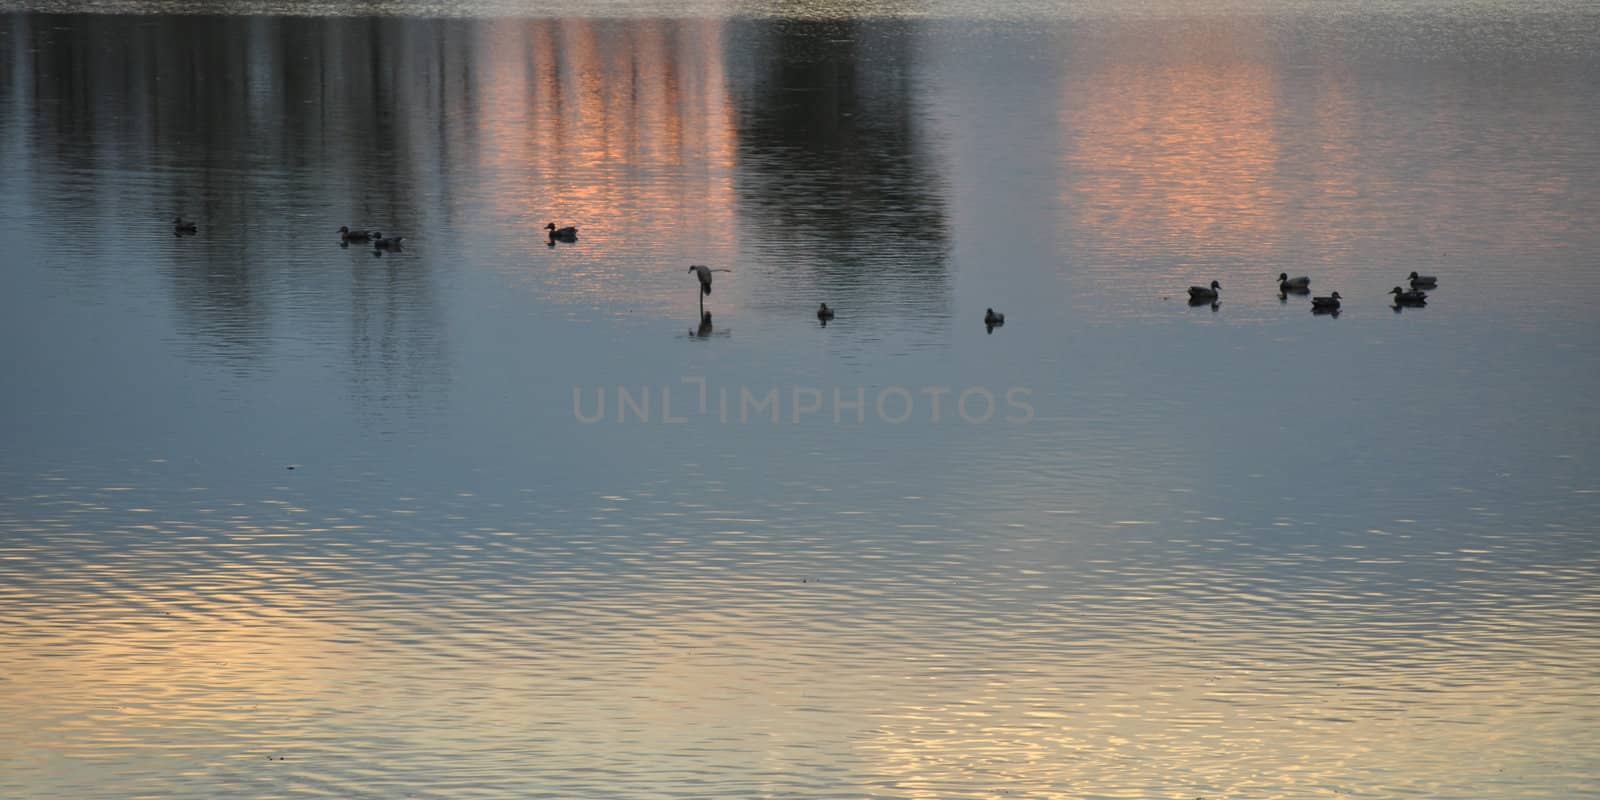 Ducks on the water by RefocusPhoto